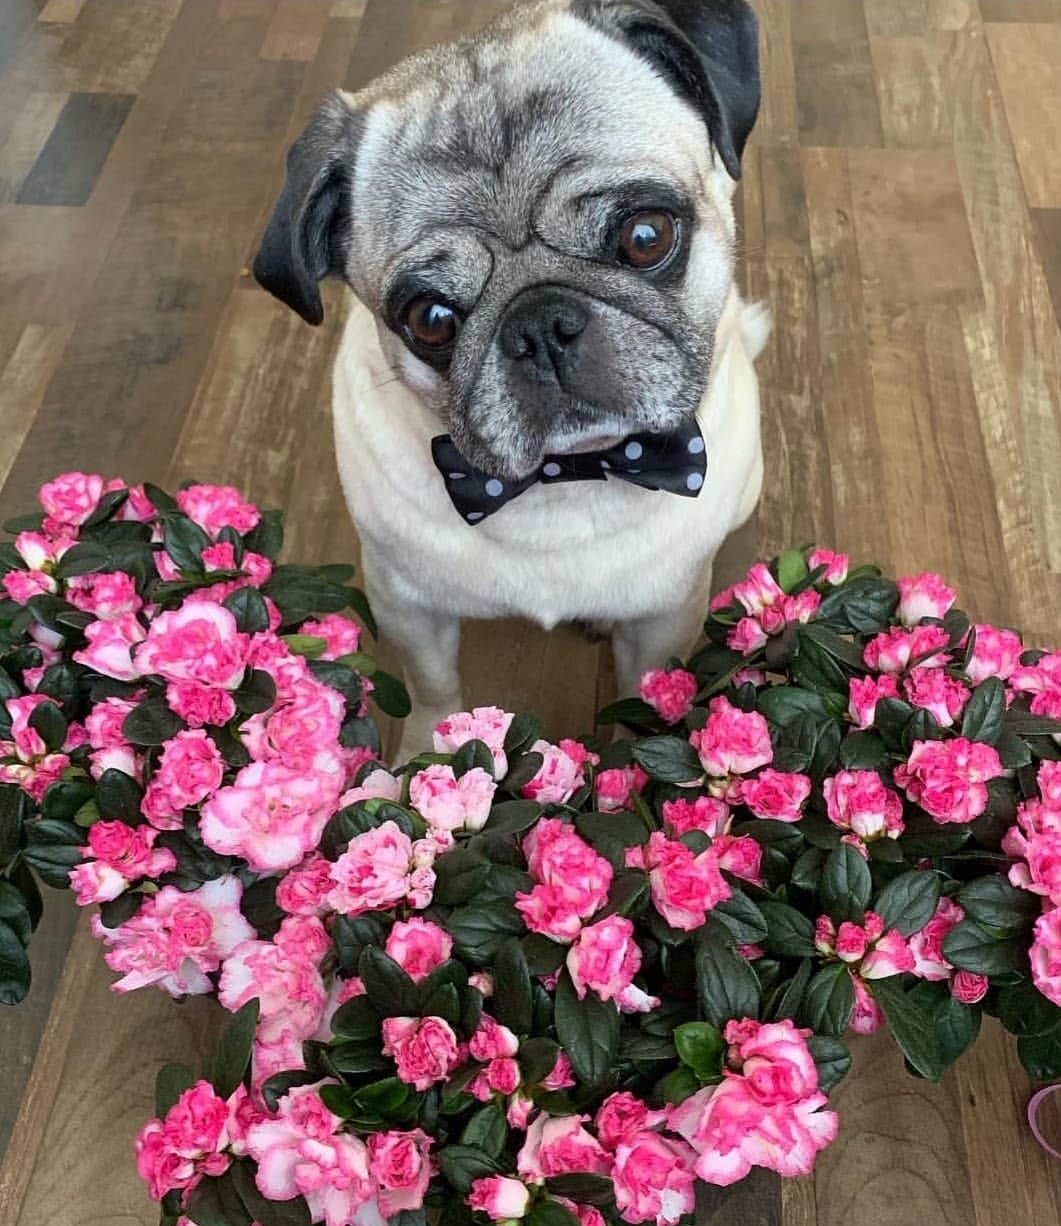 A pug wearing a bow tie sitting on the floor behind a bunch of pink flowers